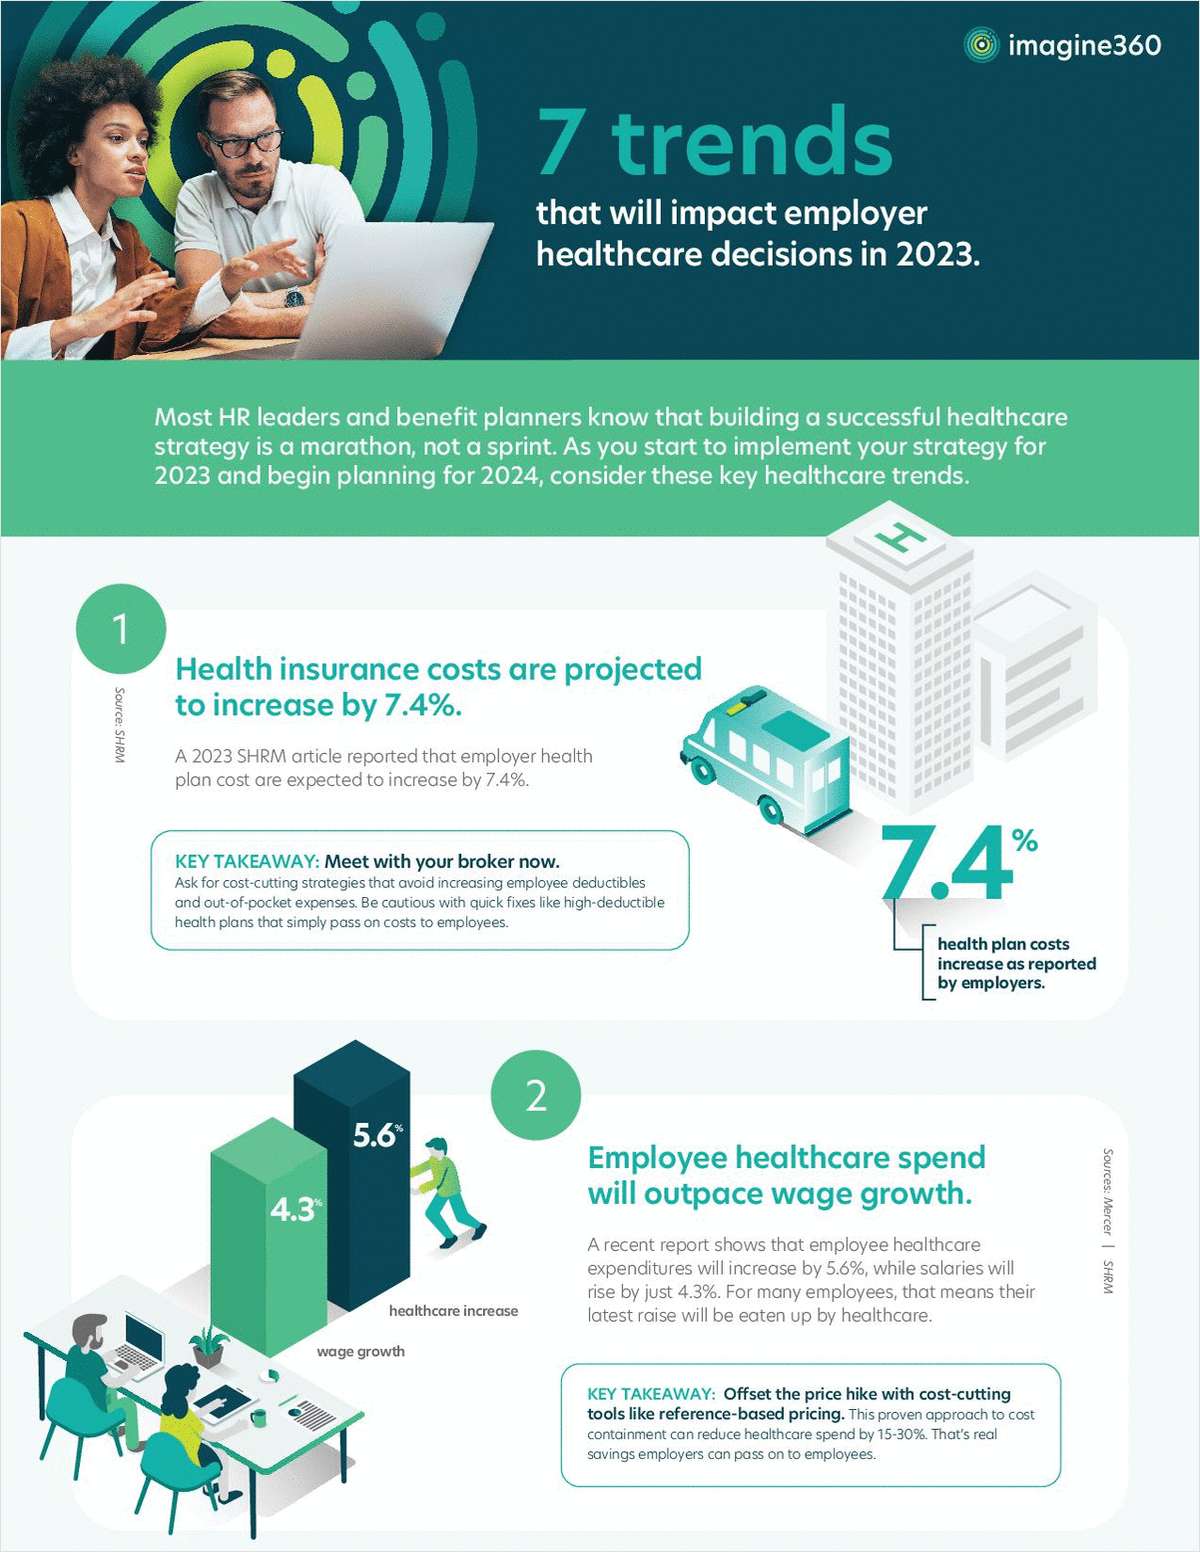 7 Trends That Will Impact Employer Healthcare Decisions in 2023 link